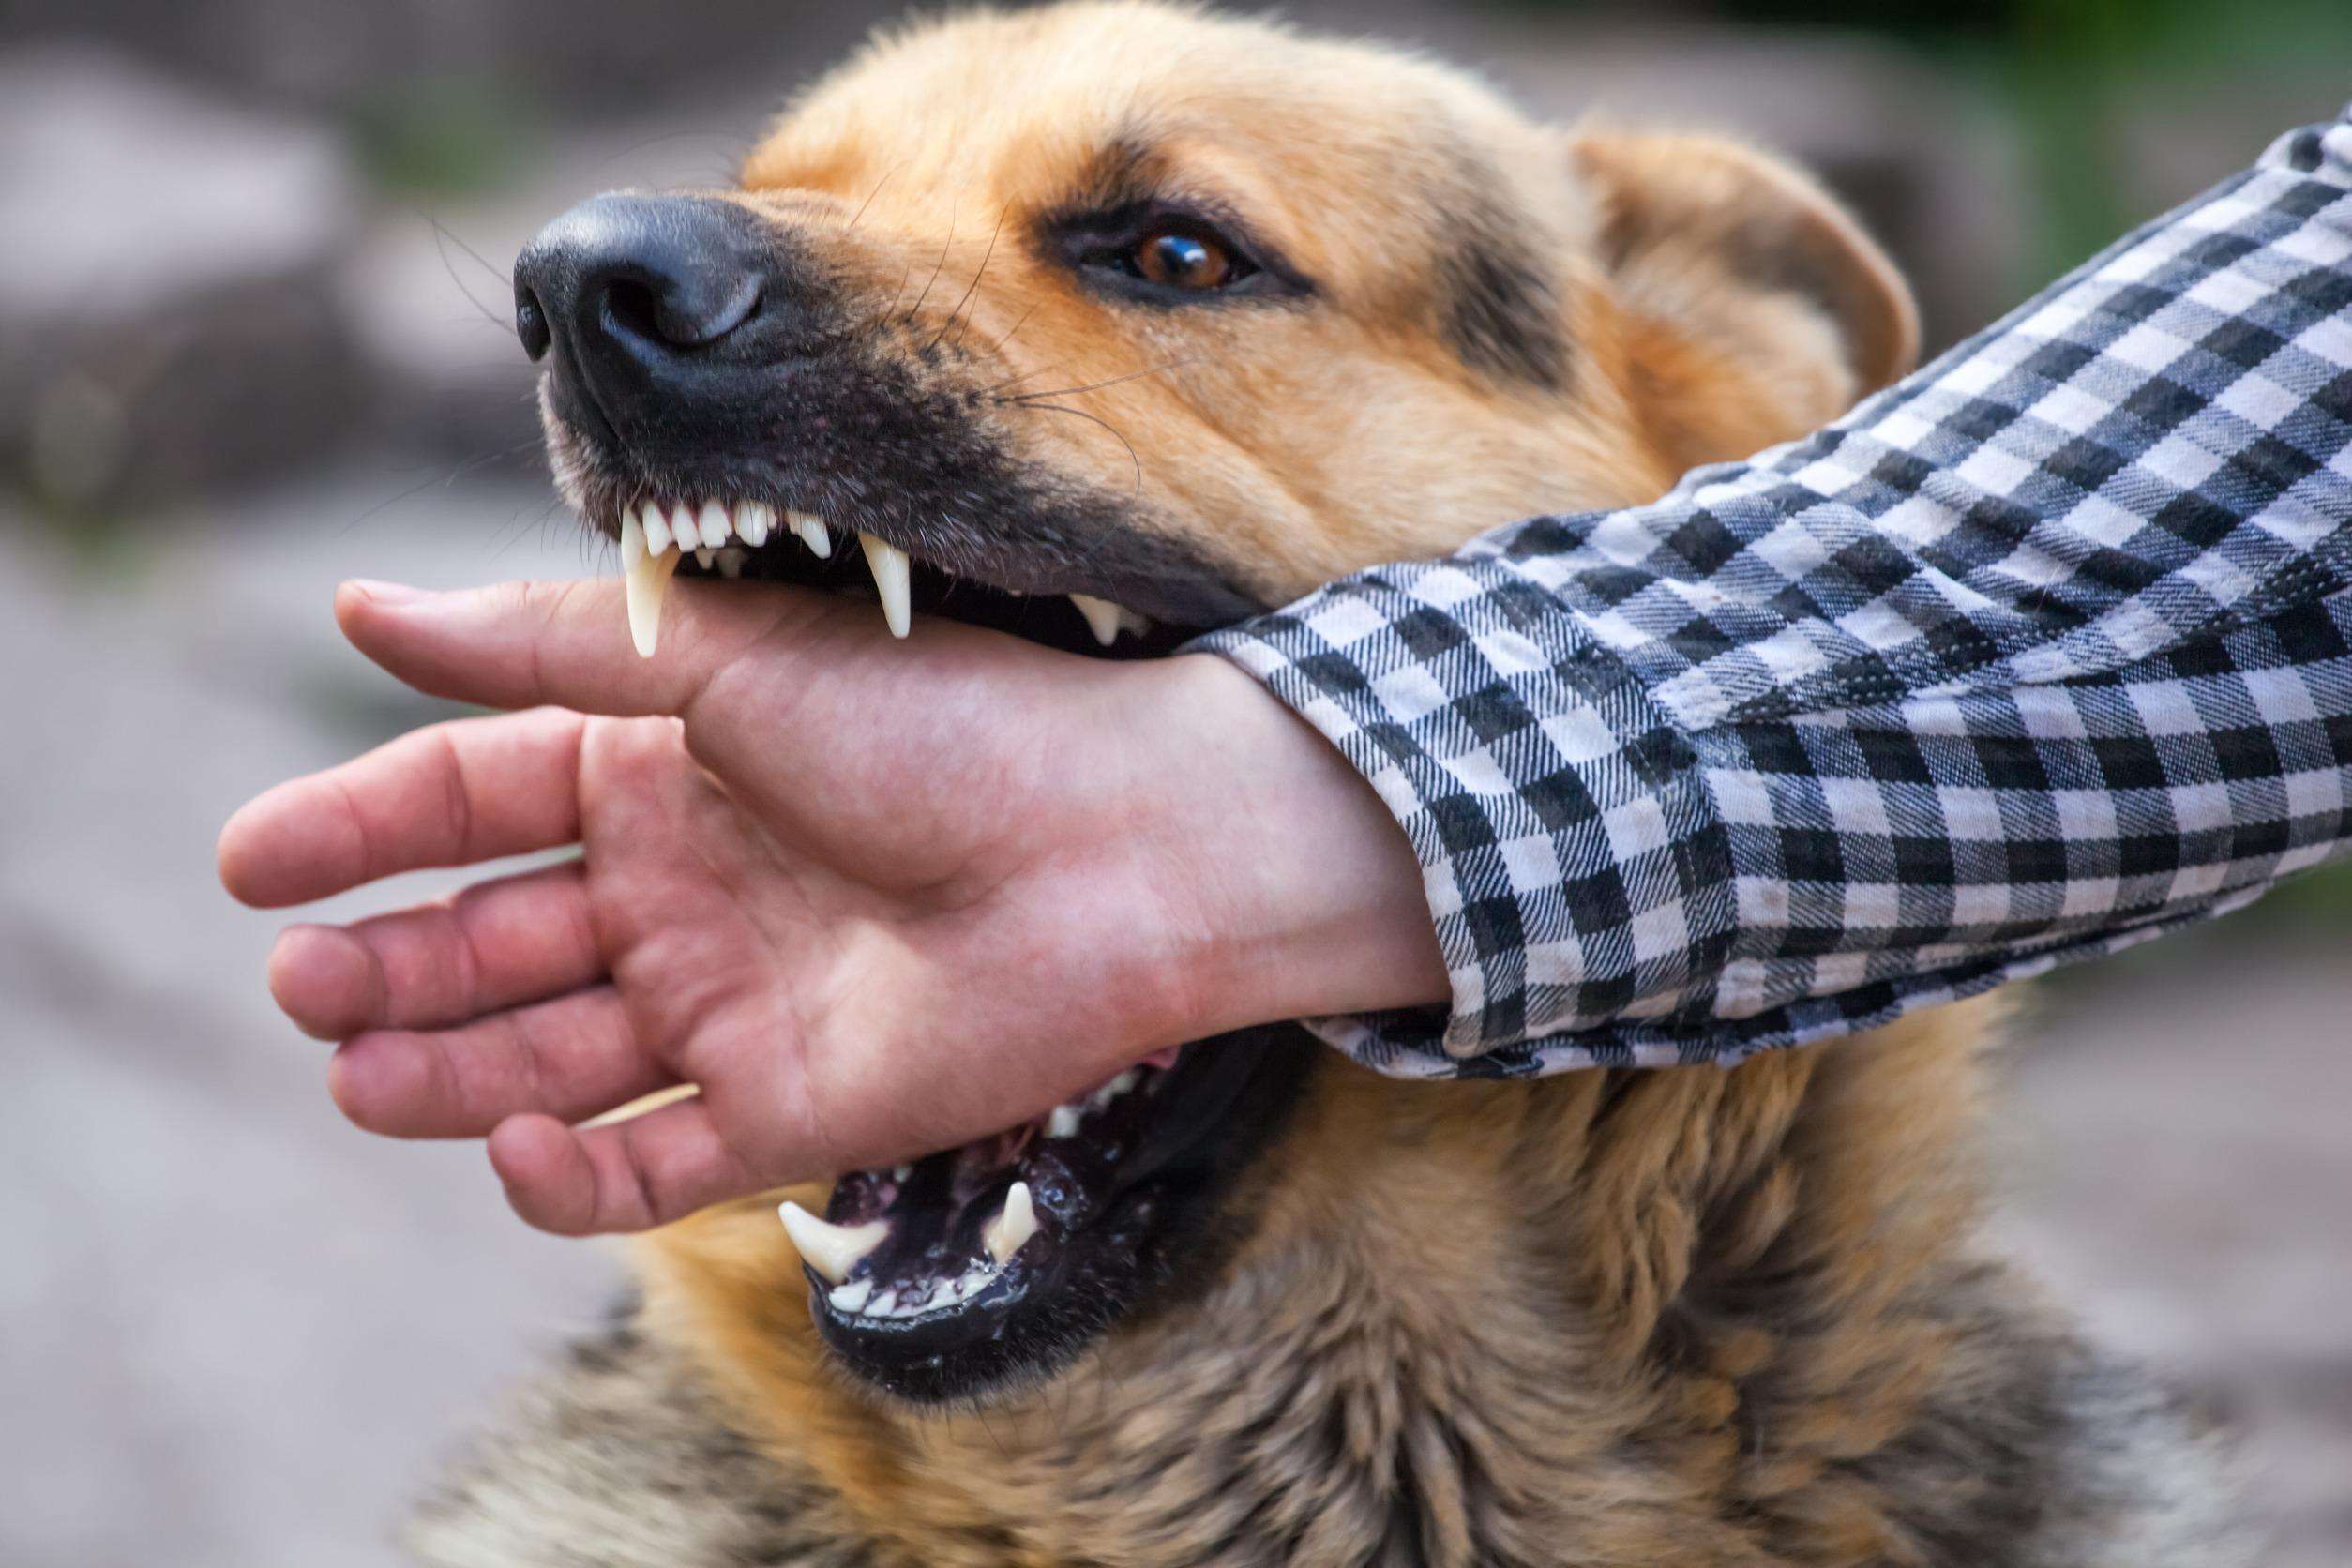 Dog Bite Lawyer: What Kind of Lawyer Do I Need for a Dog Bite?